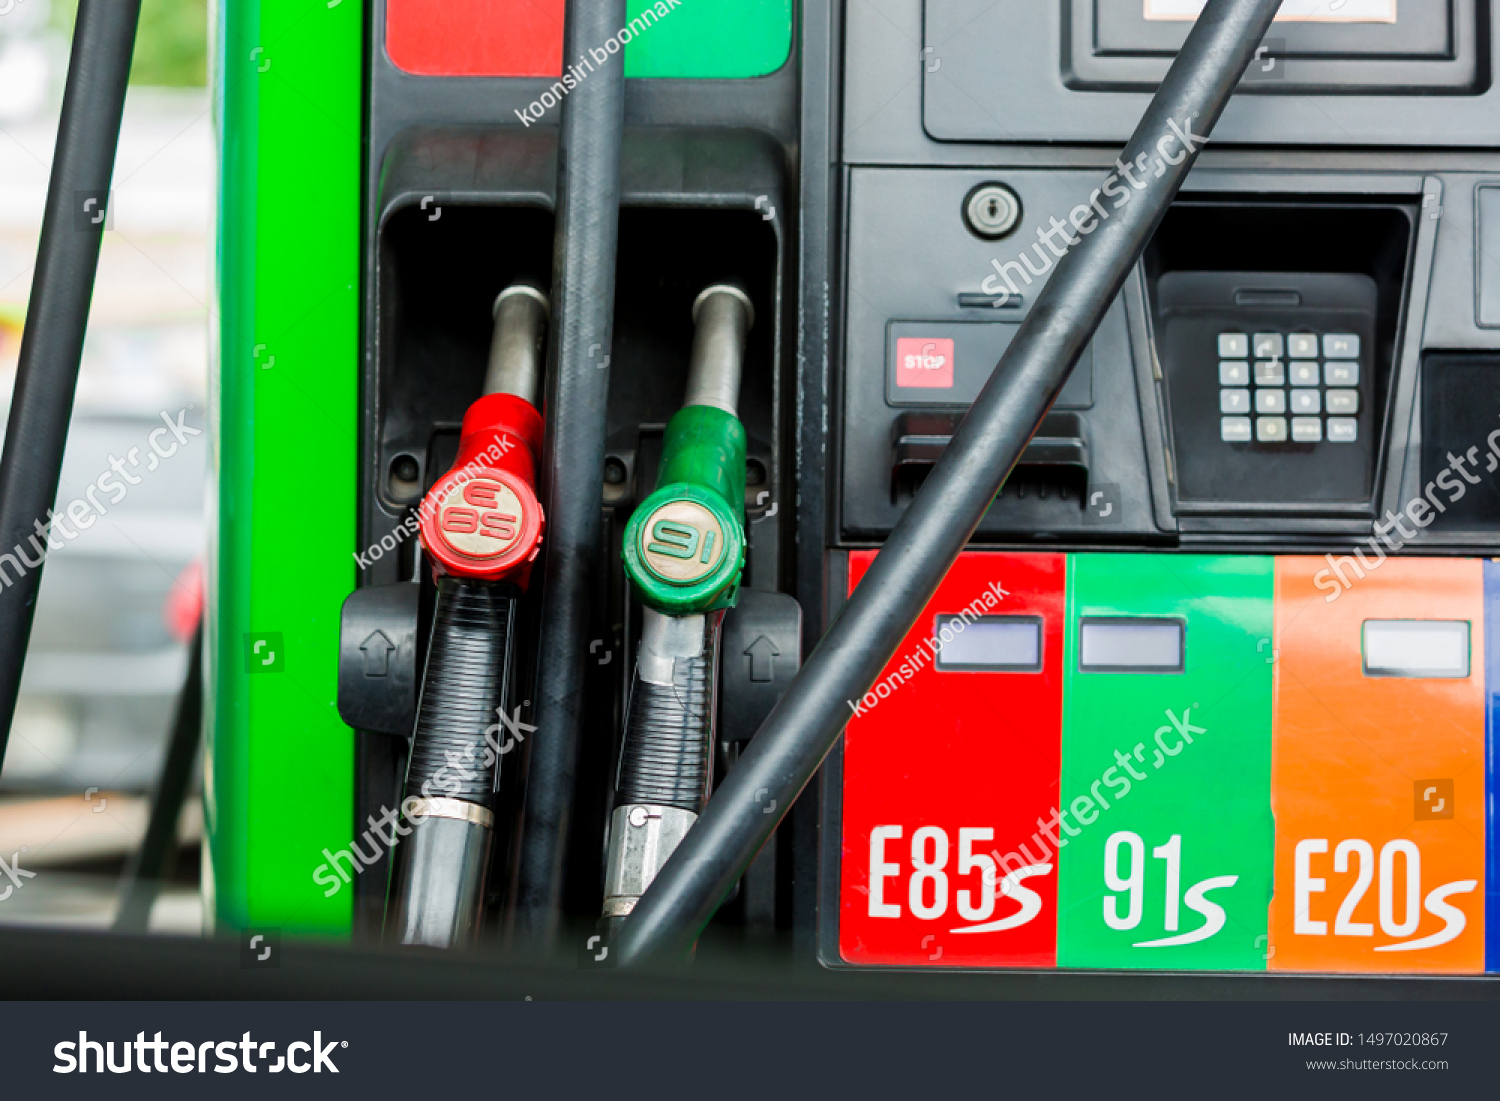 Gas pump nozzles in a service station, Close up fuel nozzles at gas station, Panel and Dashboard of fuel nozzles of E85 E20 and Gasohol 91. The concept of fuel energy. #1497020867